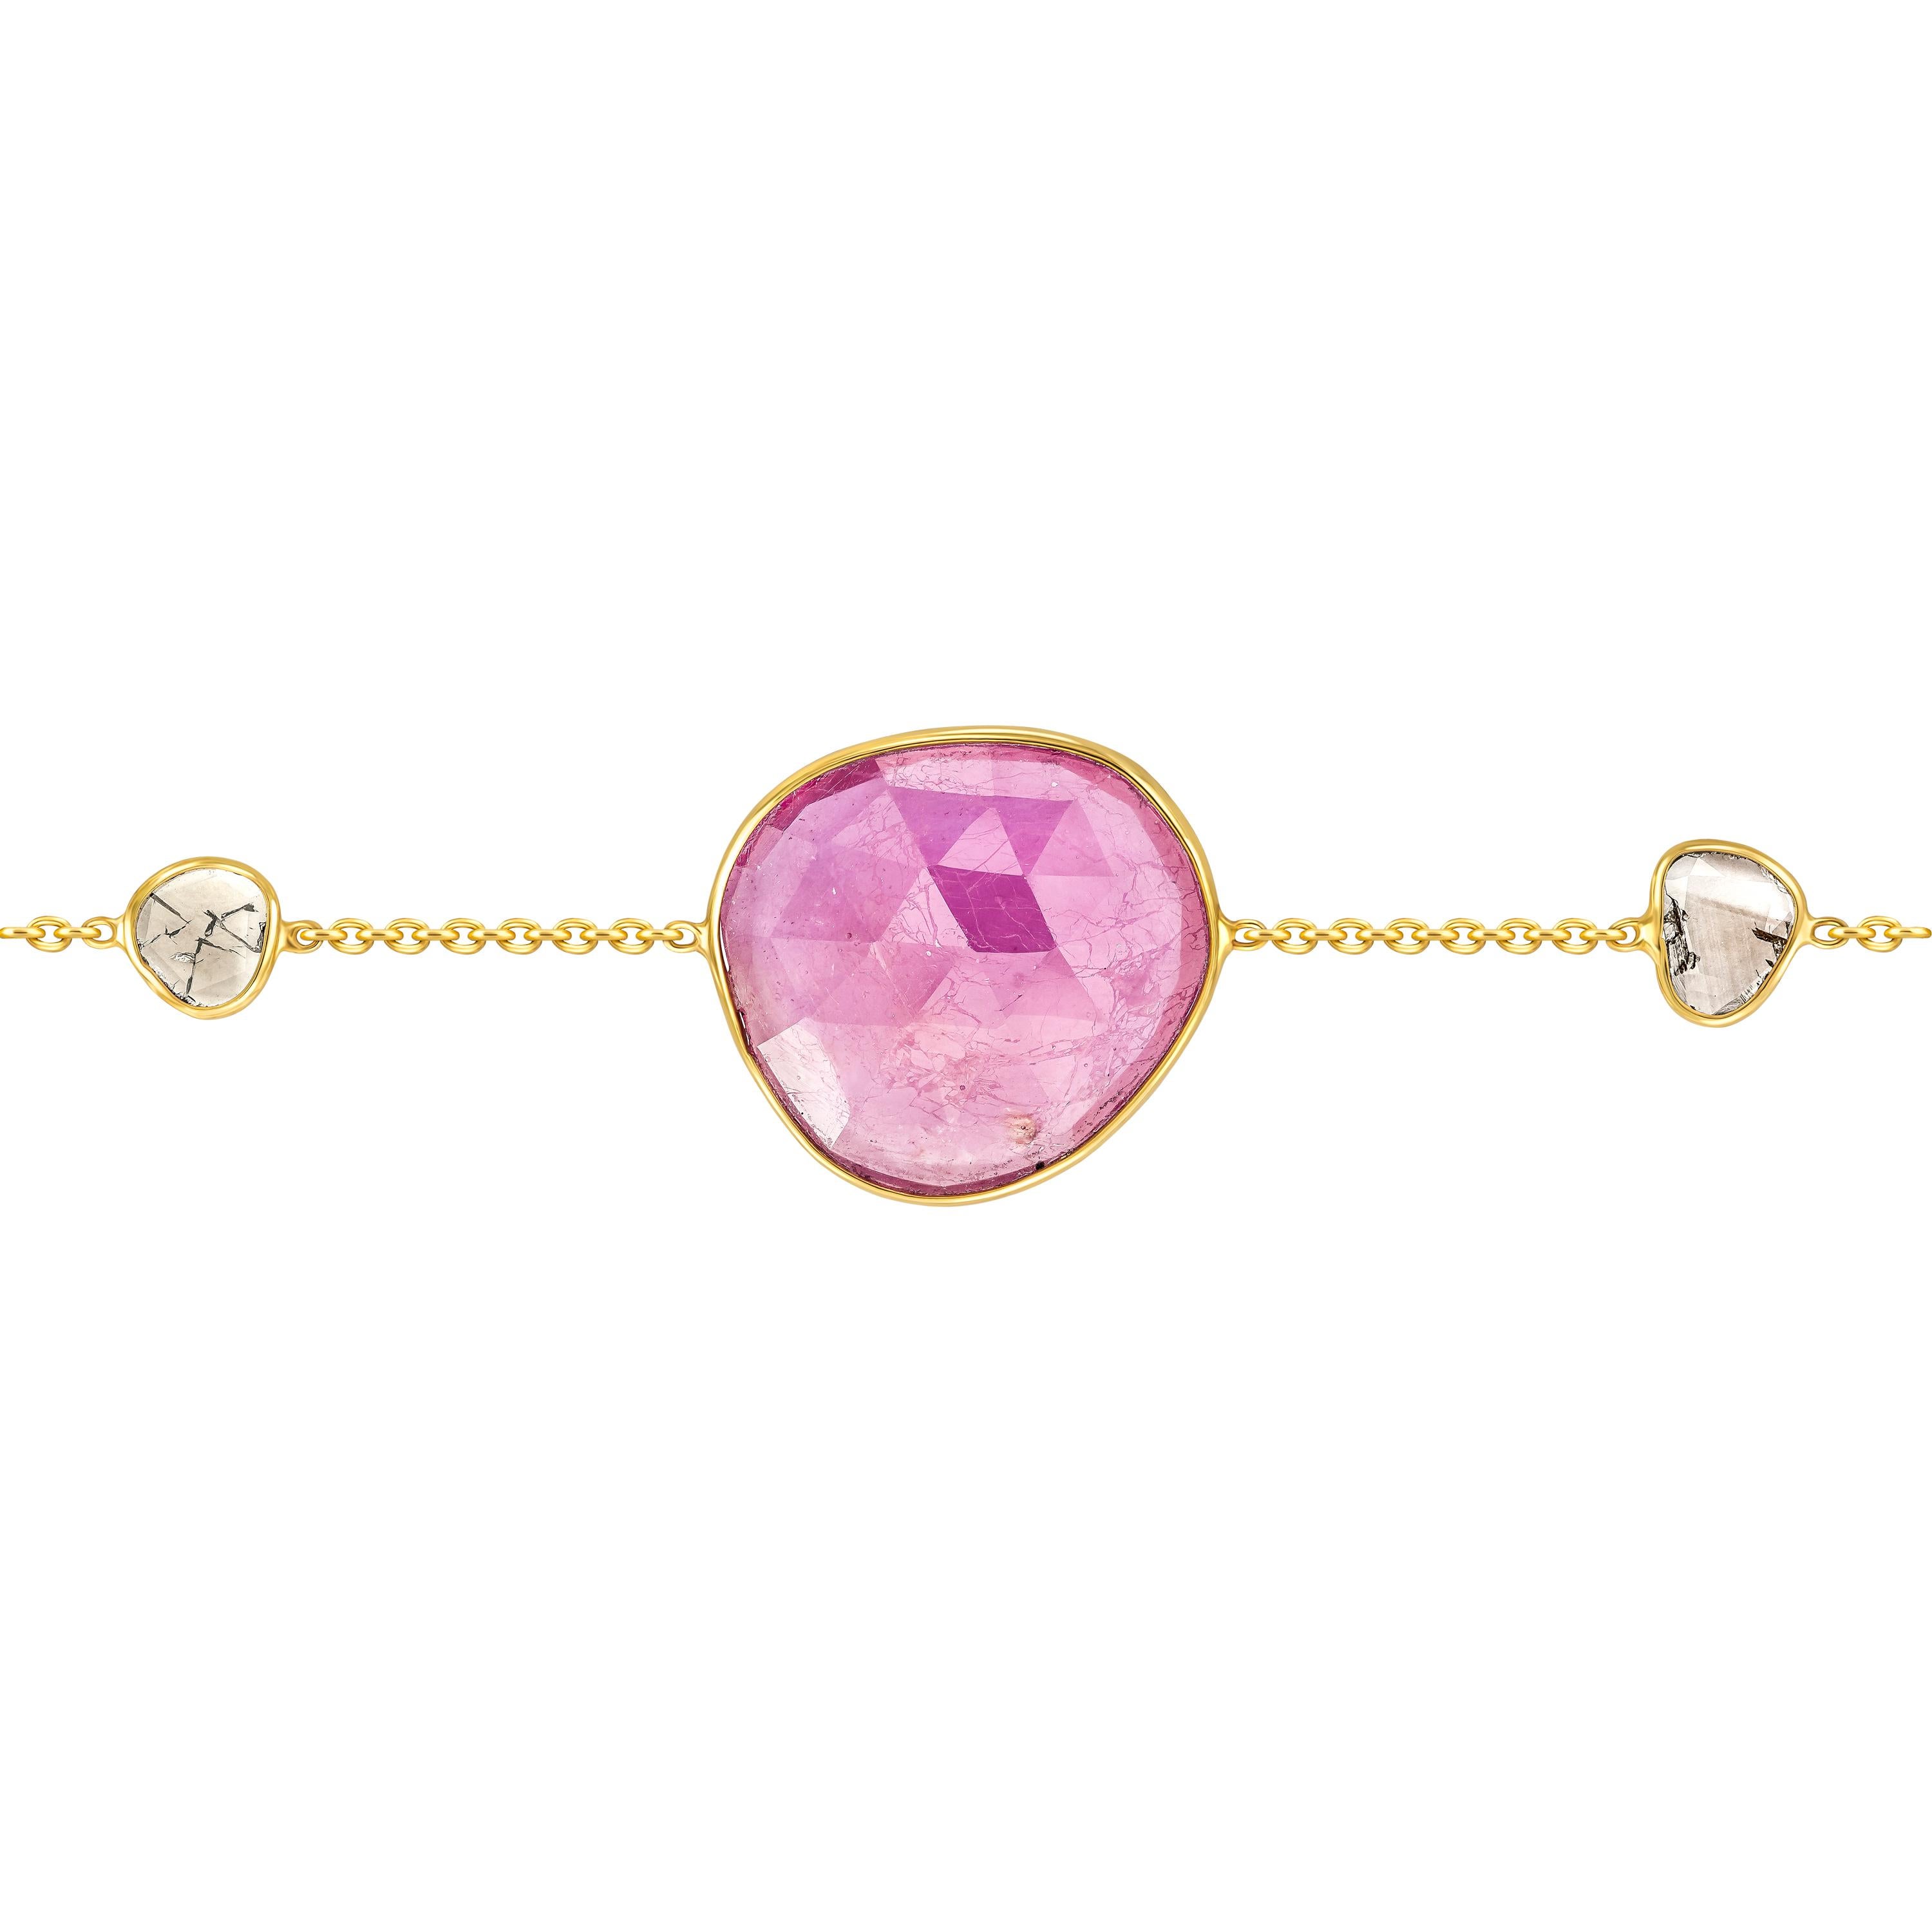 Adorn your wrist with this beautiful 7.05 Carat Rose Cut Ruby Bracelet from the Artisan Collection made by Tresor Paris featuring 0.22 Carat in two Diamond slices set in 18 Karat Yellow Gold. Each piece is hand made with a unique shaped precious